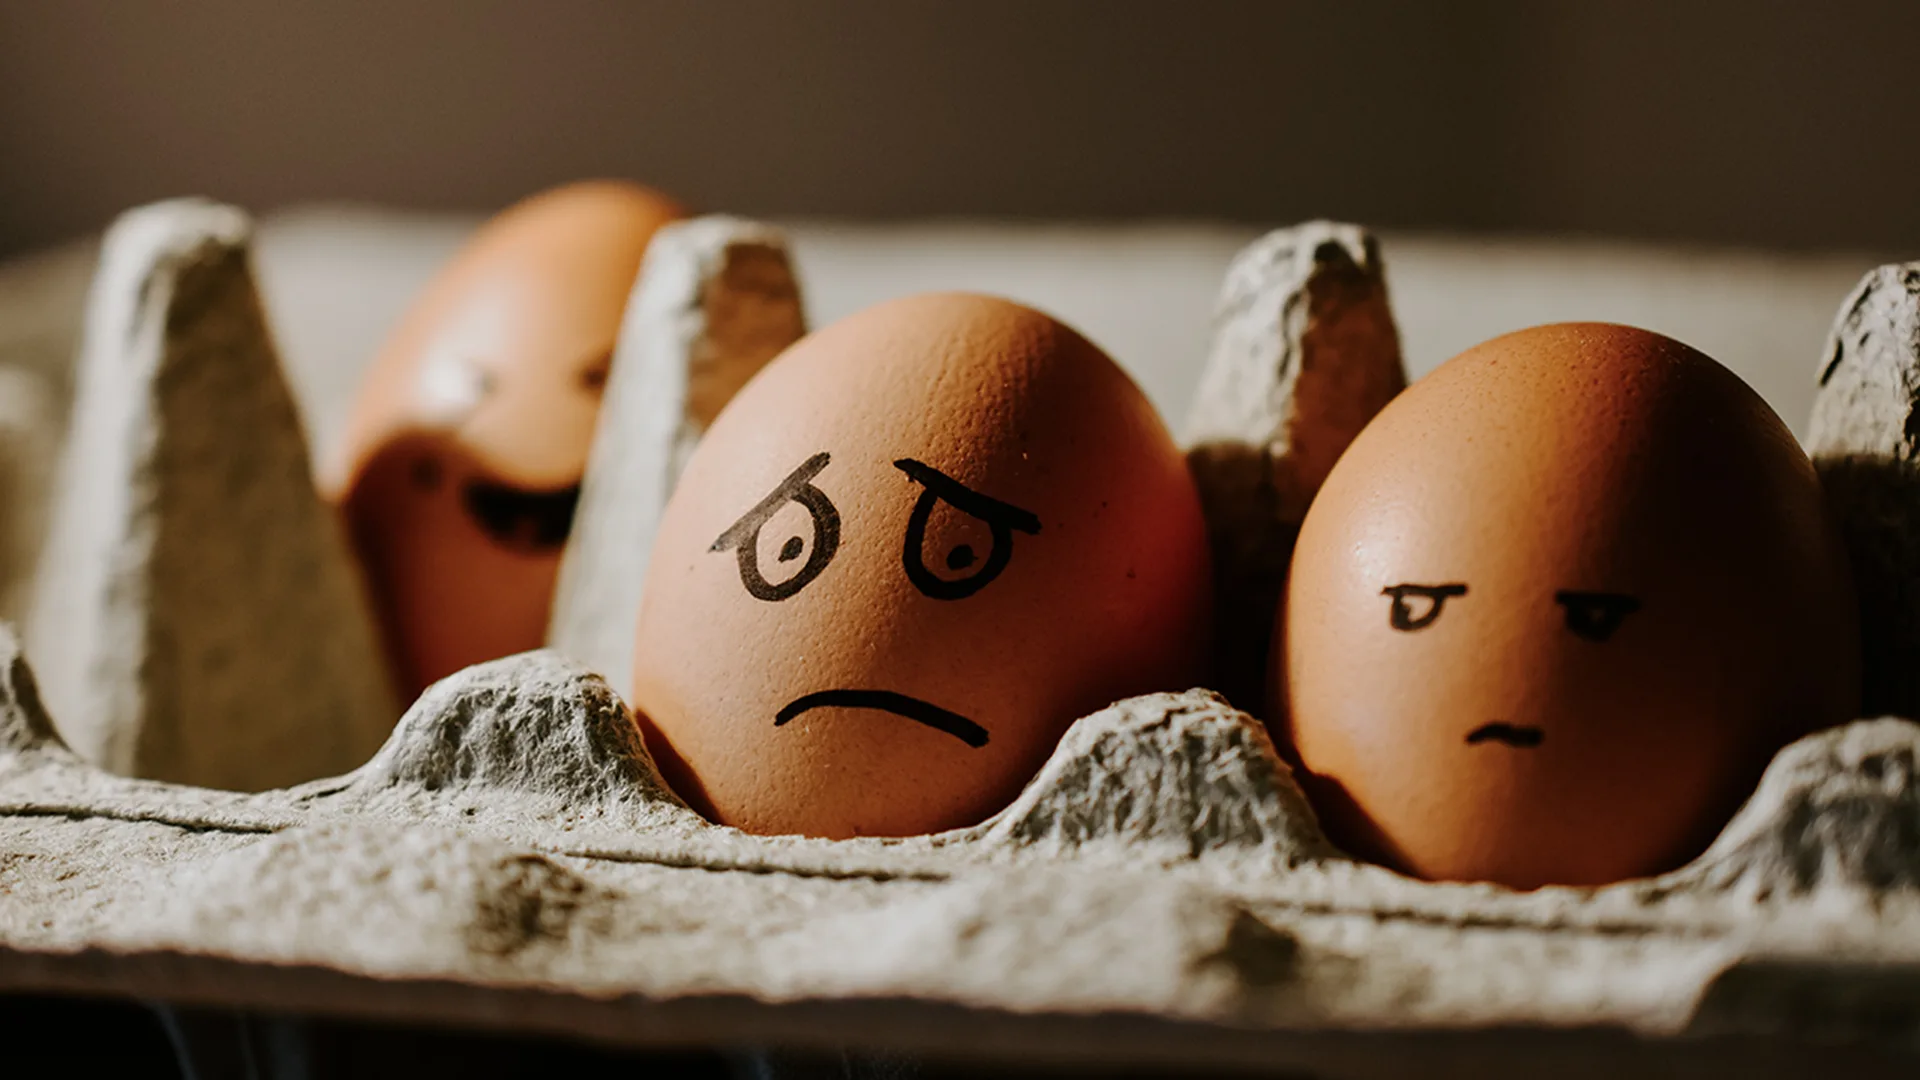 Eggs with sad faces drawn on